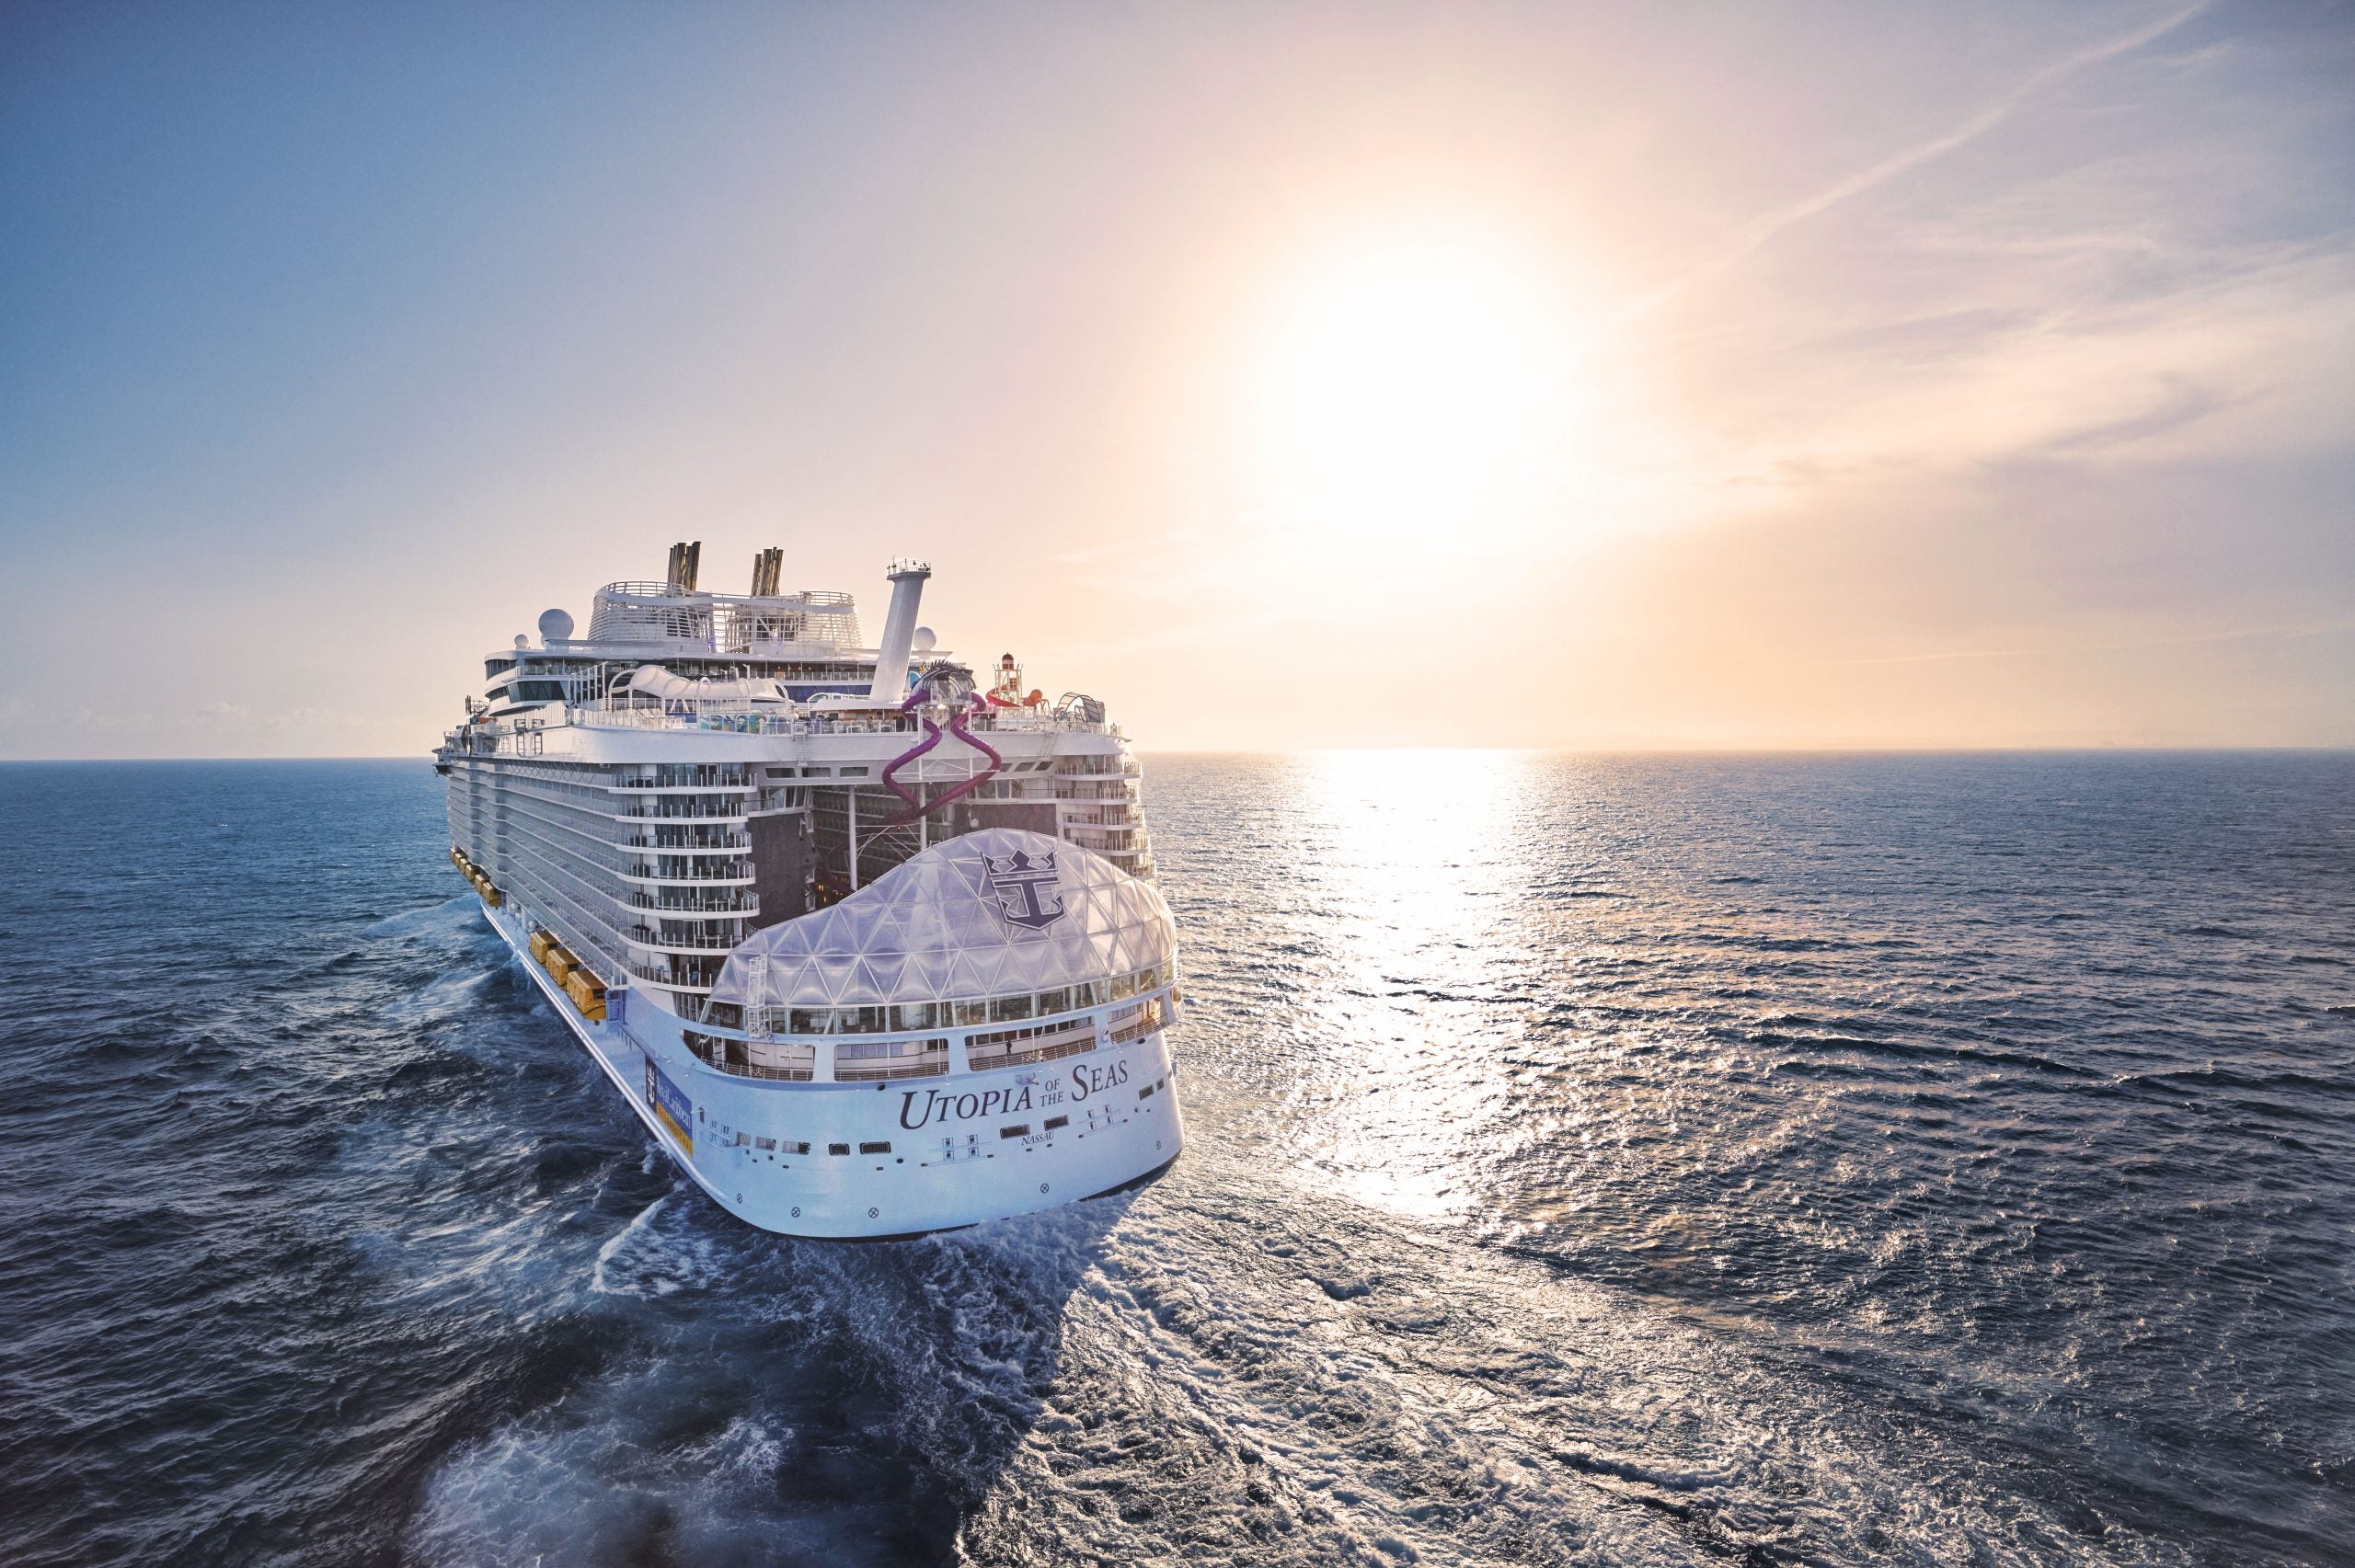 Royal Caribbean Has Curated The Perfect Three-Night Cruise With Its Latest Ship, Utopia Of The Seas